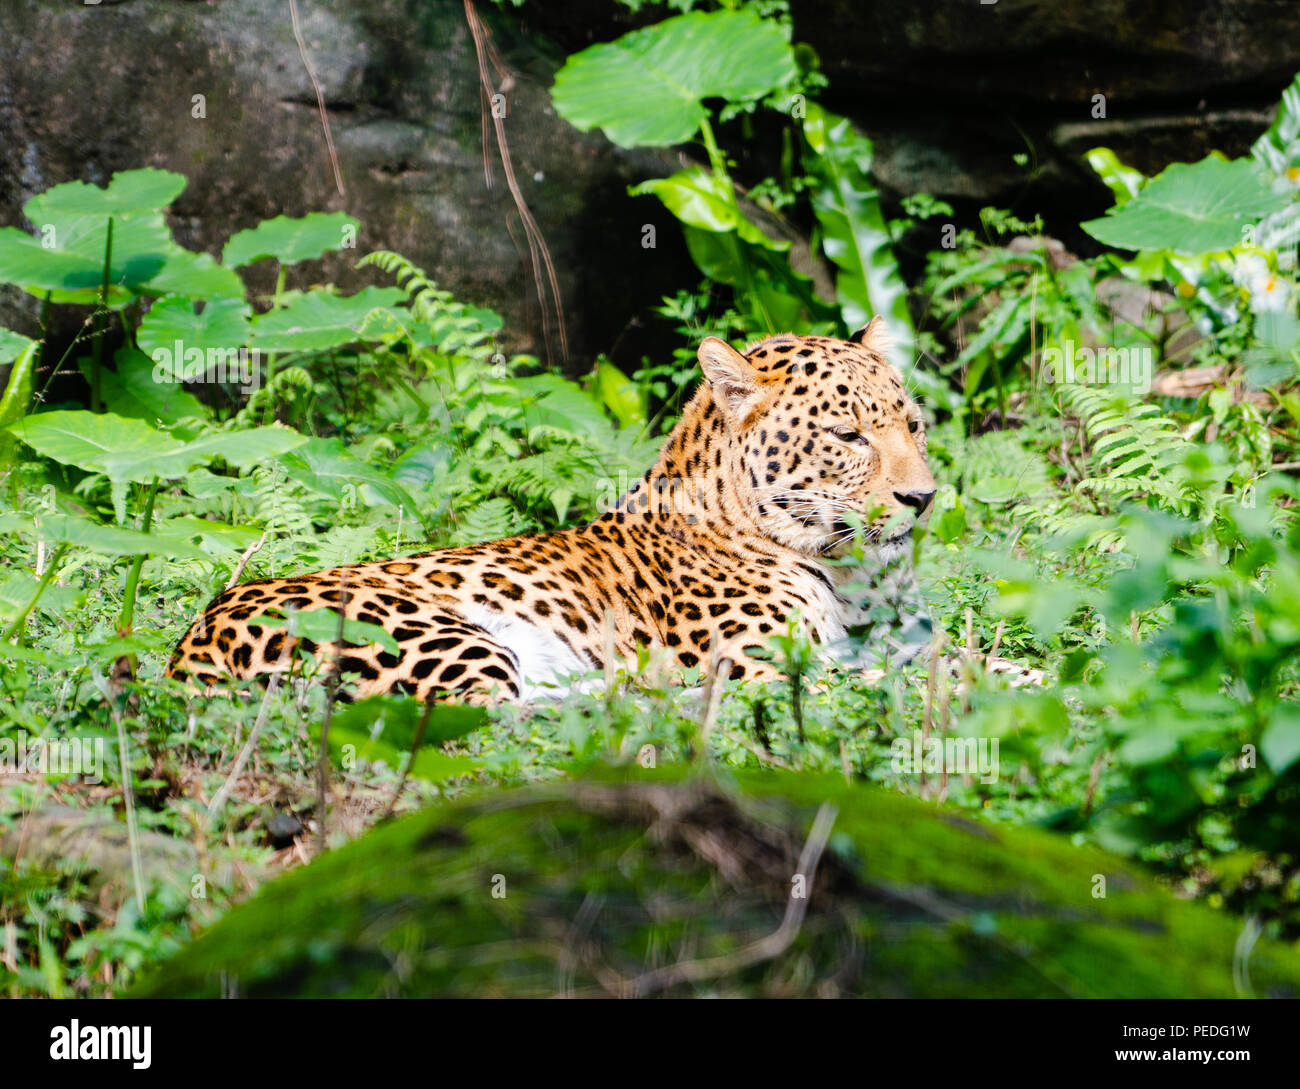 Leopard Panthera pardus resting in middle of green nature with open closed eyes Stock Photo